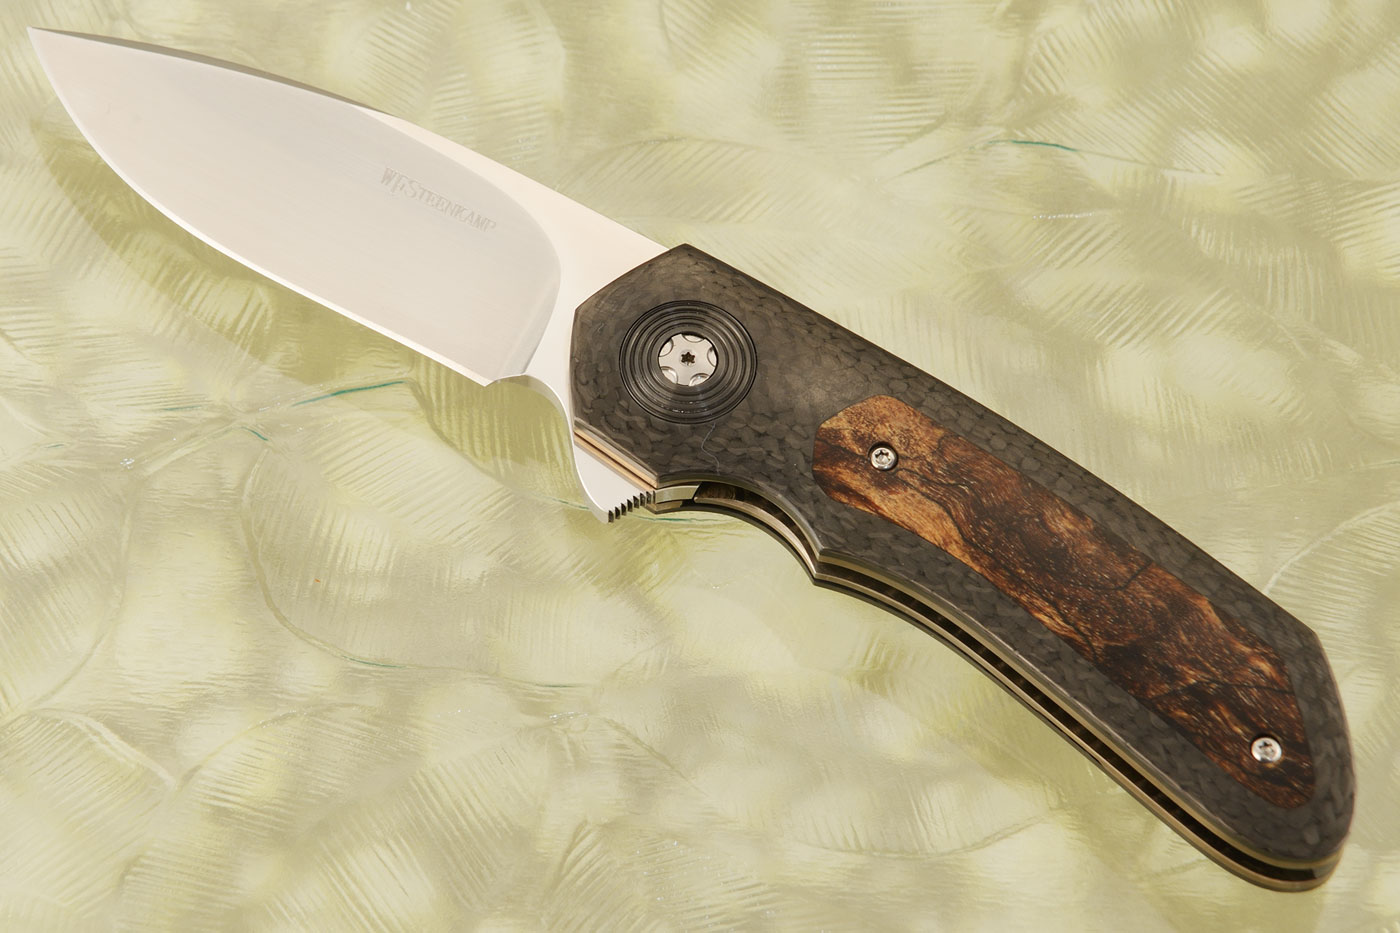 Nomad Jr Flipper with Carbon Fiber and Spalted Maple (IKBS) - M390